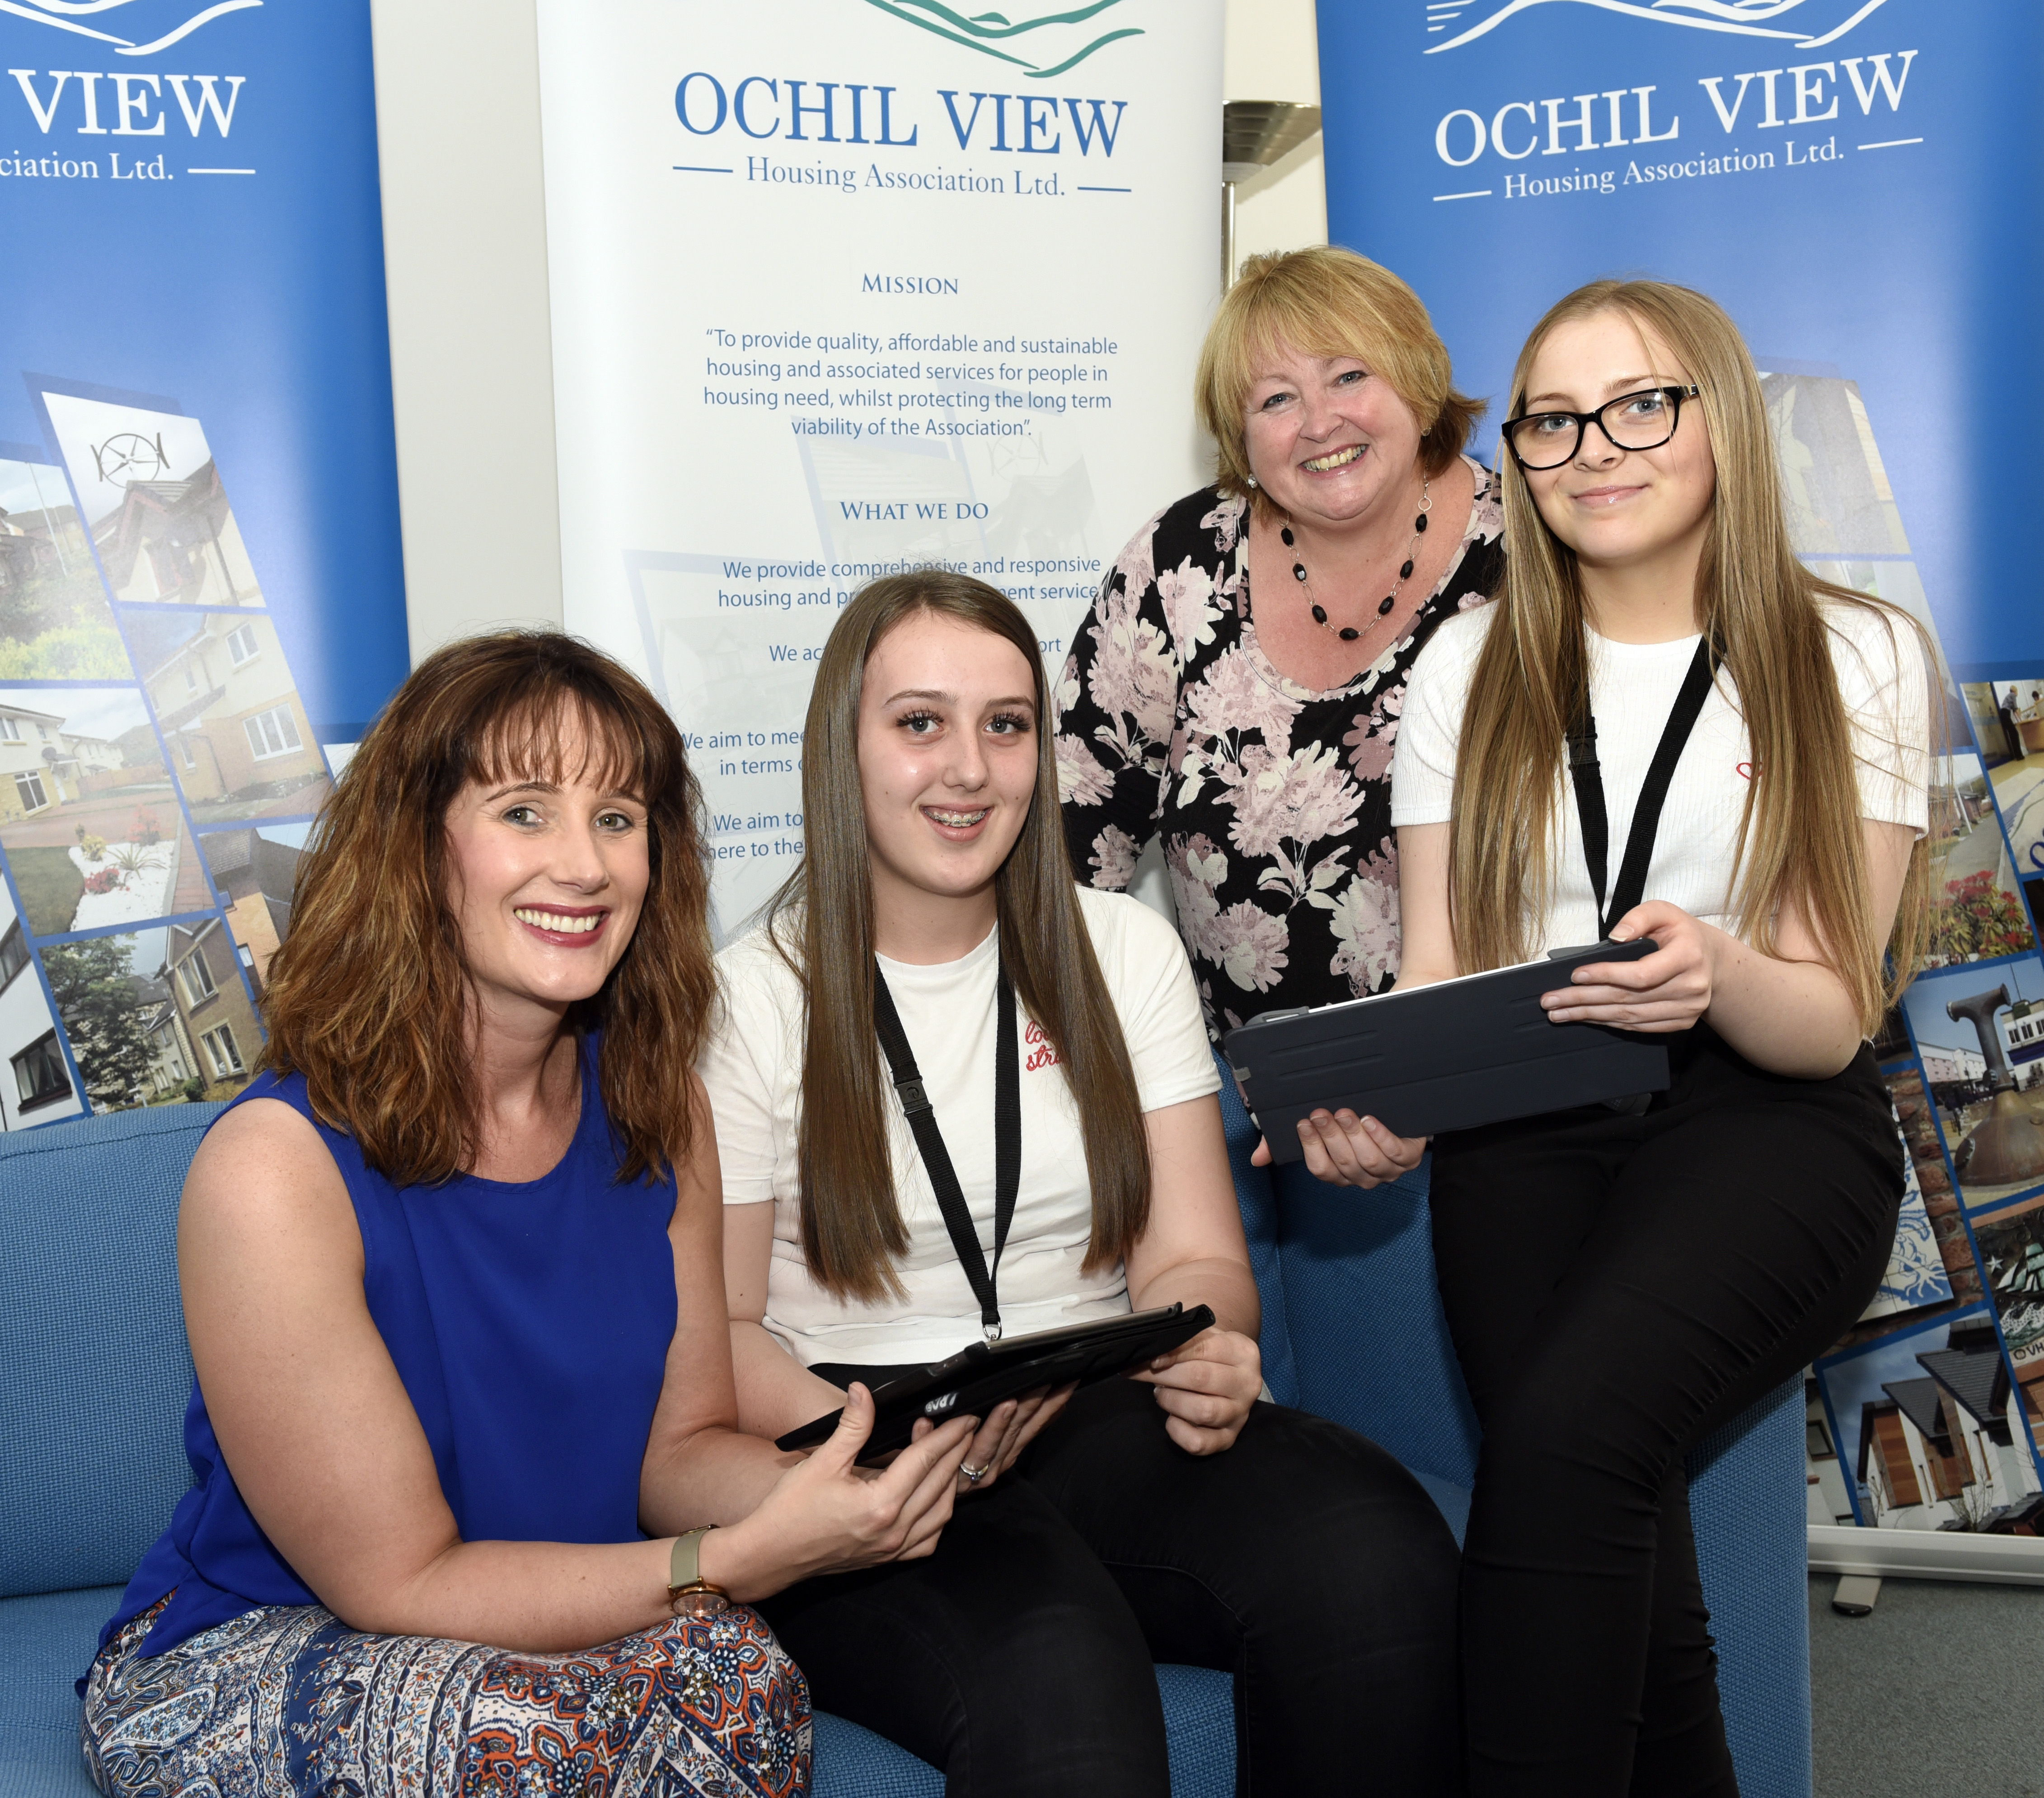 School pupils get a taste of the world of work at Ochil View